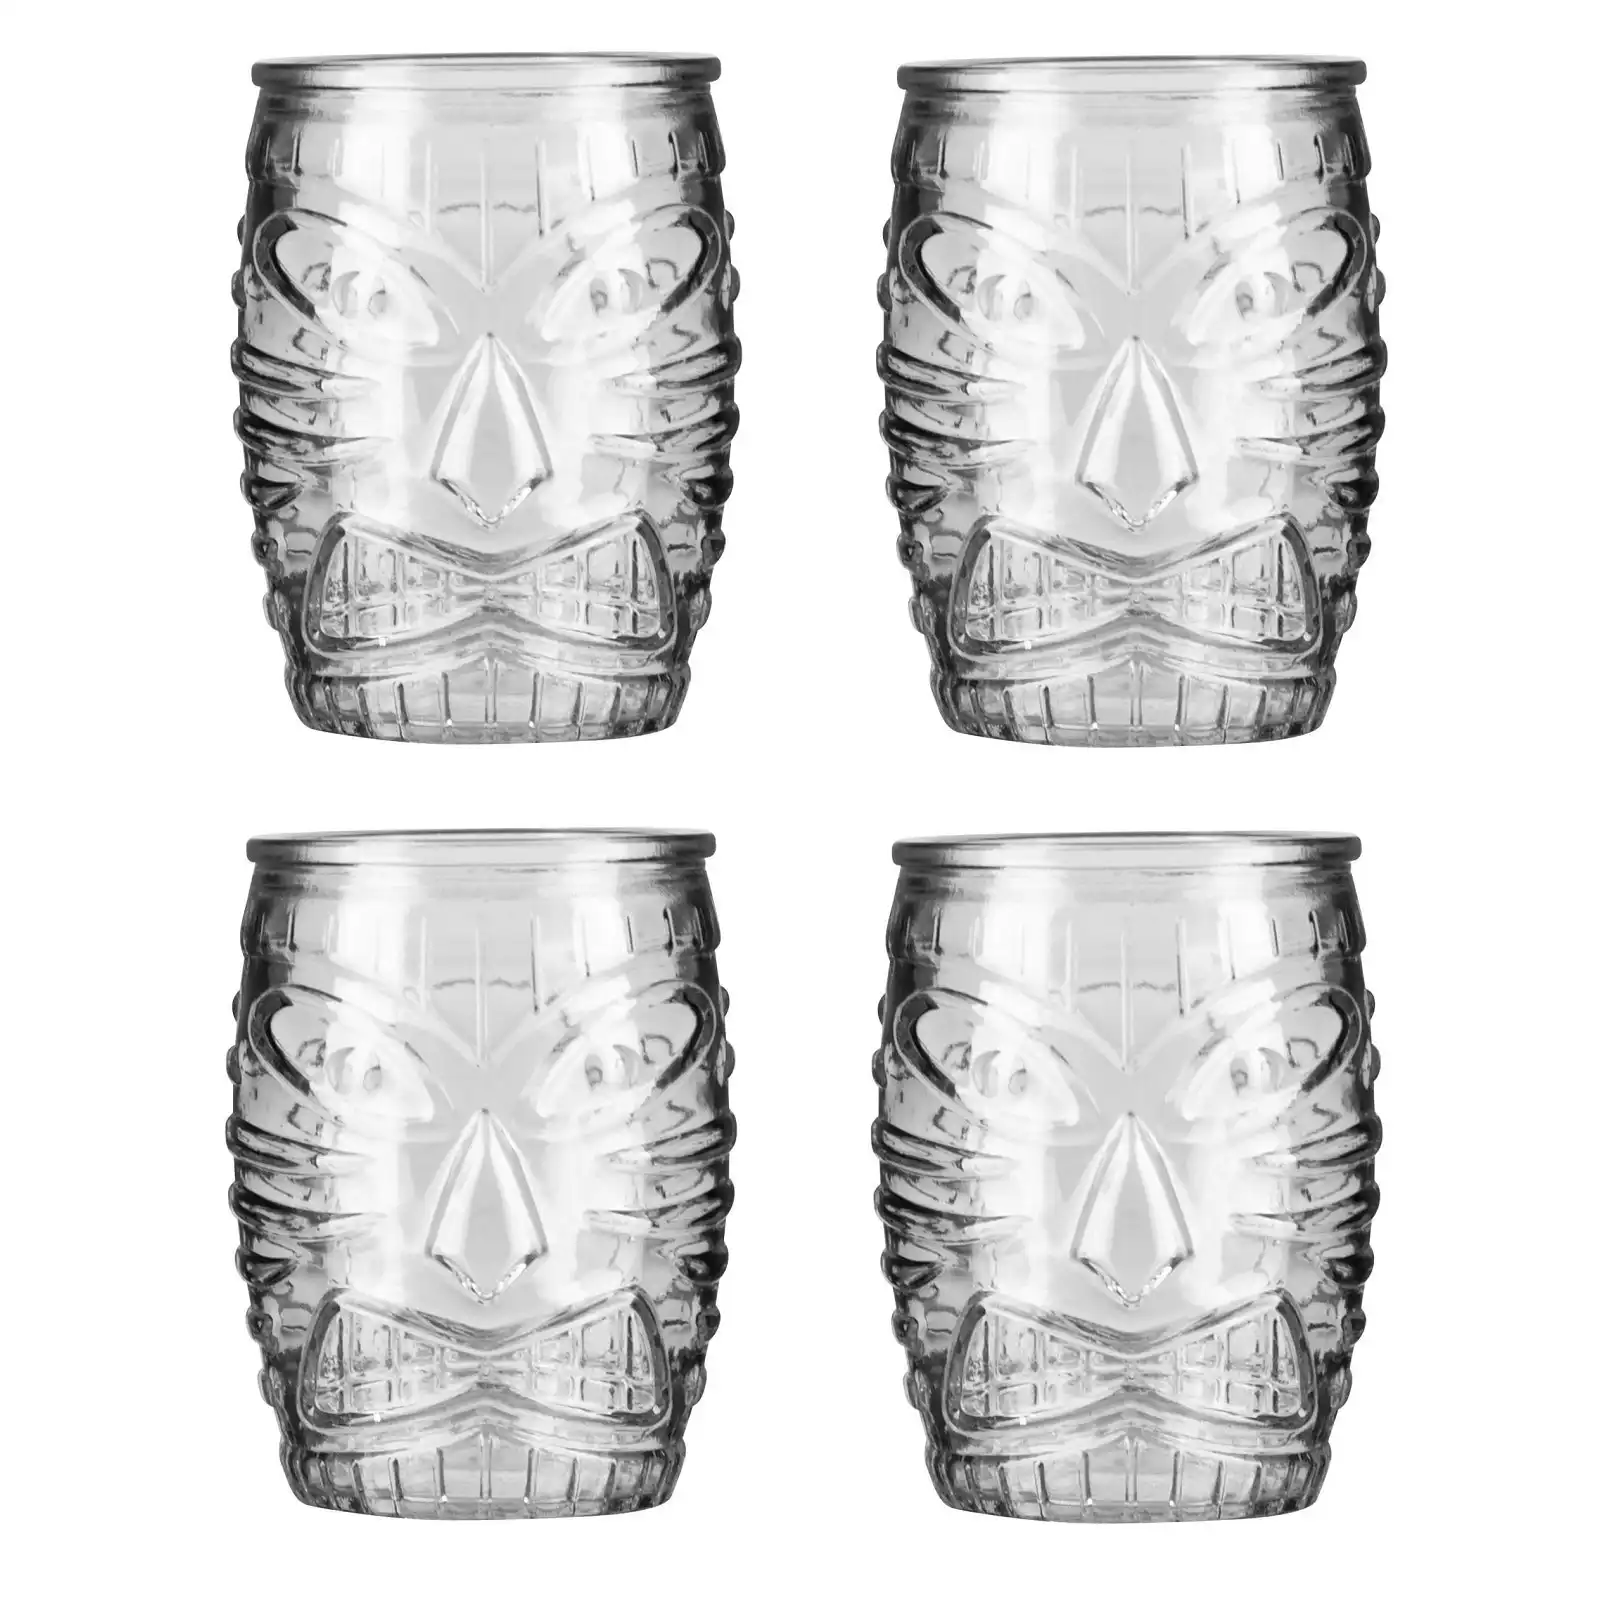 Libbey TIKI DOUBLE OLD FASHIONED GLASS 470ml - Set of 4